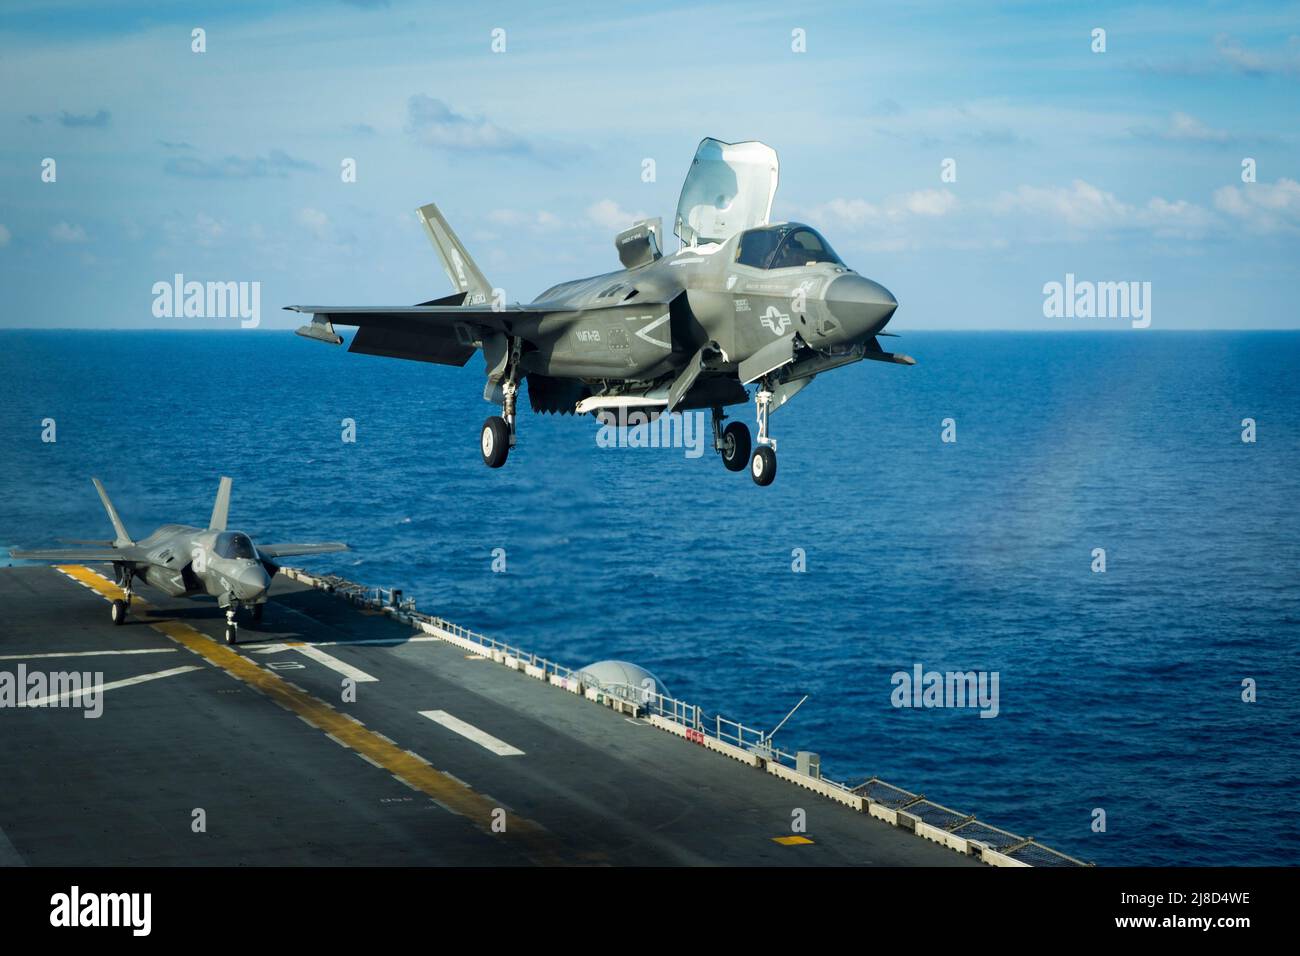 A U.S. Marine Corps F-35B Lightning II fighter aircraft, attached to the Dragons of Marine Medium Tiltrotor Squadron 265, performs a vertical landing on the flight deck of the America-class amphibious assault ship USS America, April 18, 2020 operating on the South China Sea. Stock Photo